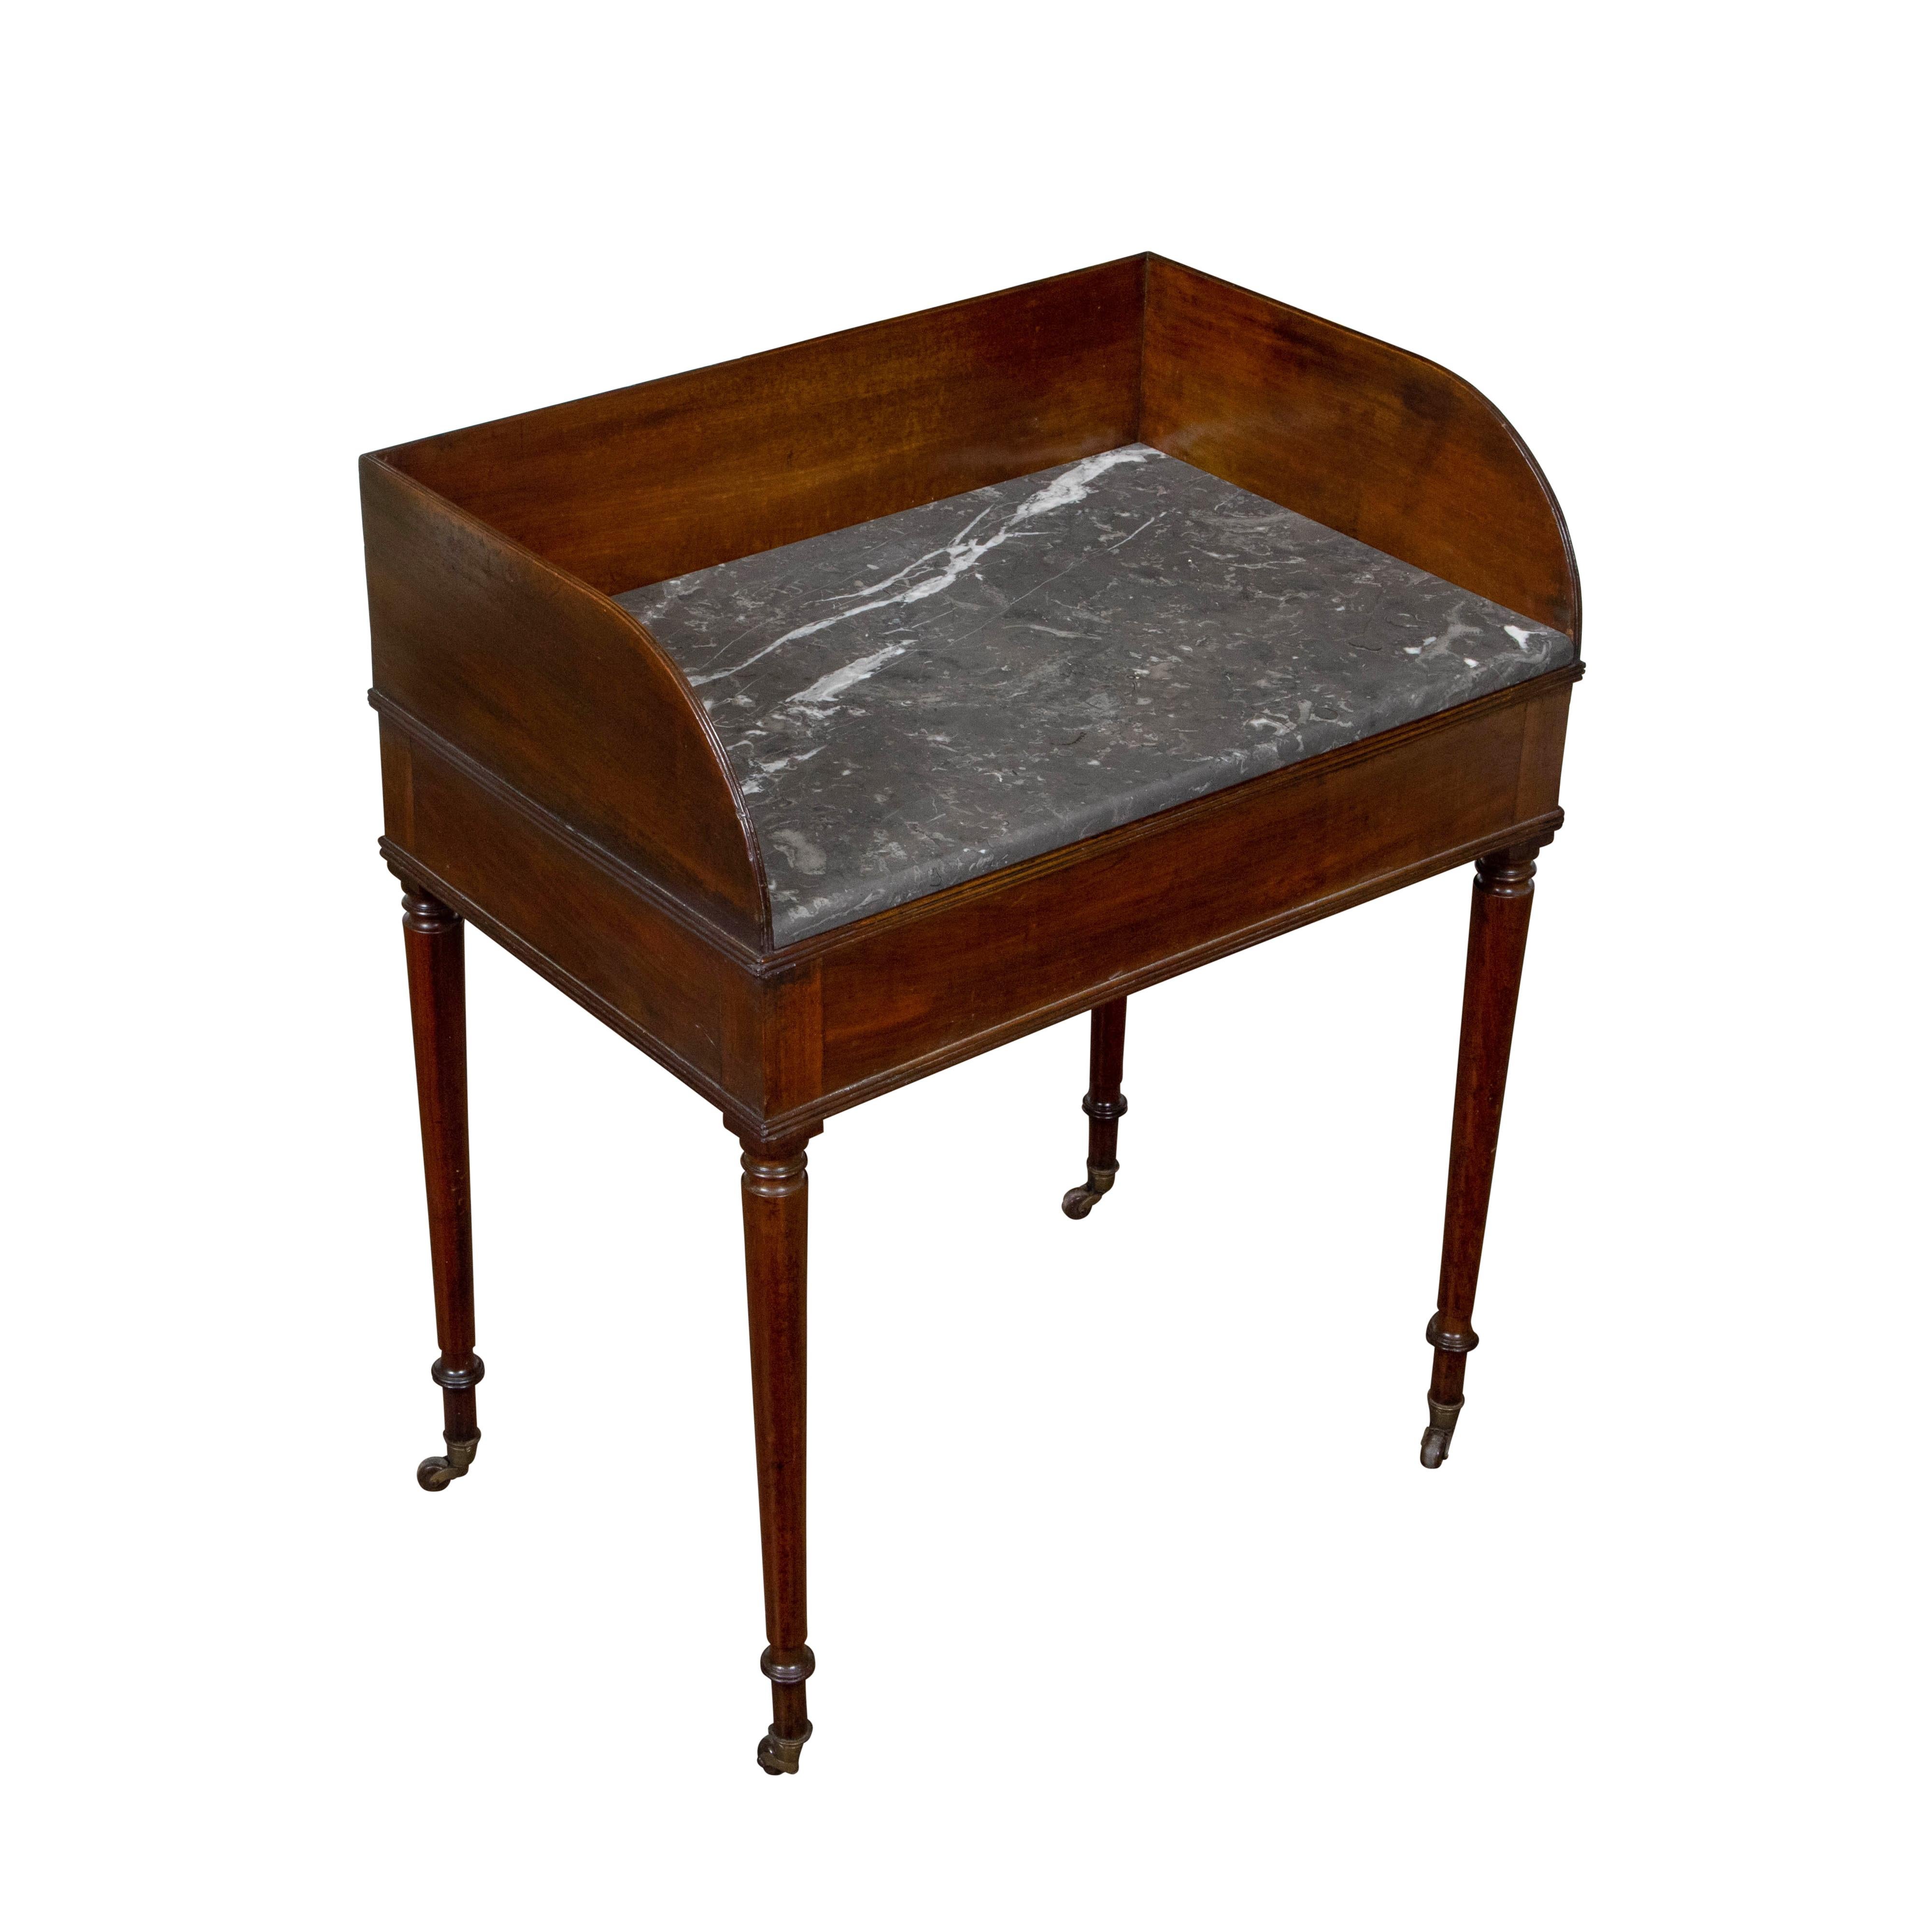 English Mahogany 1840s Washstand Table with Grey Marble Top on Casters 1